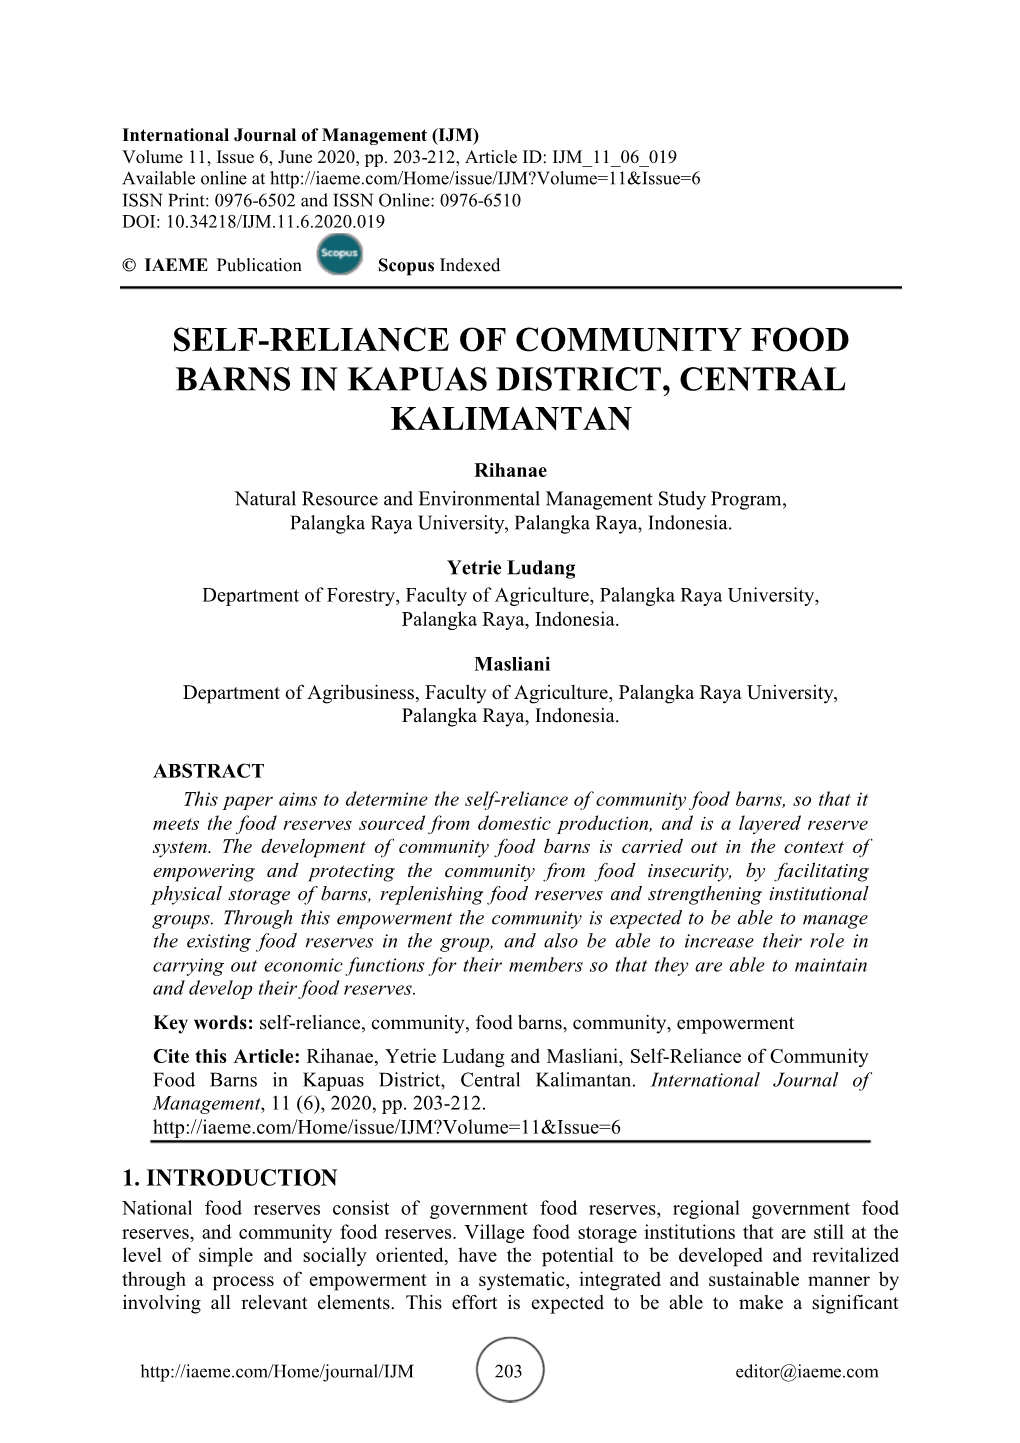 Self-Reliance of Community Food Barns in Kapuas District, Central Kalimantan